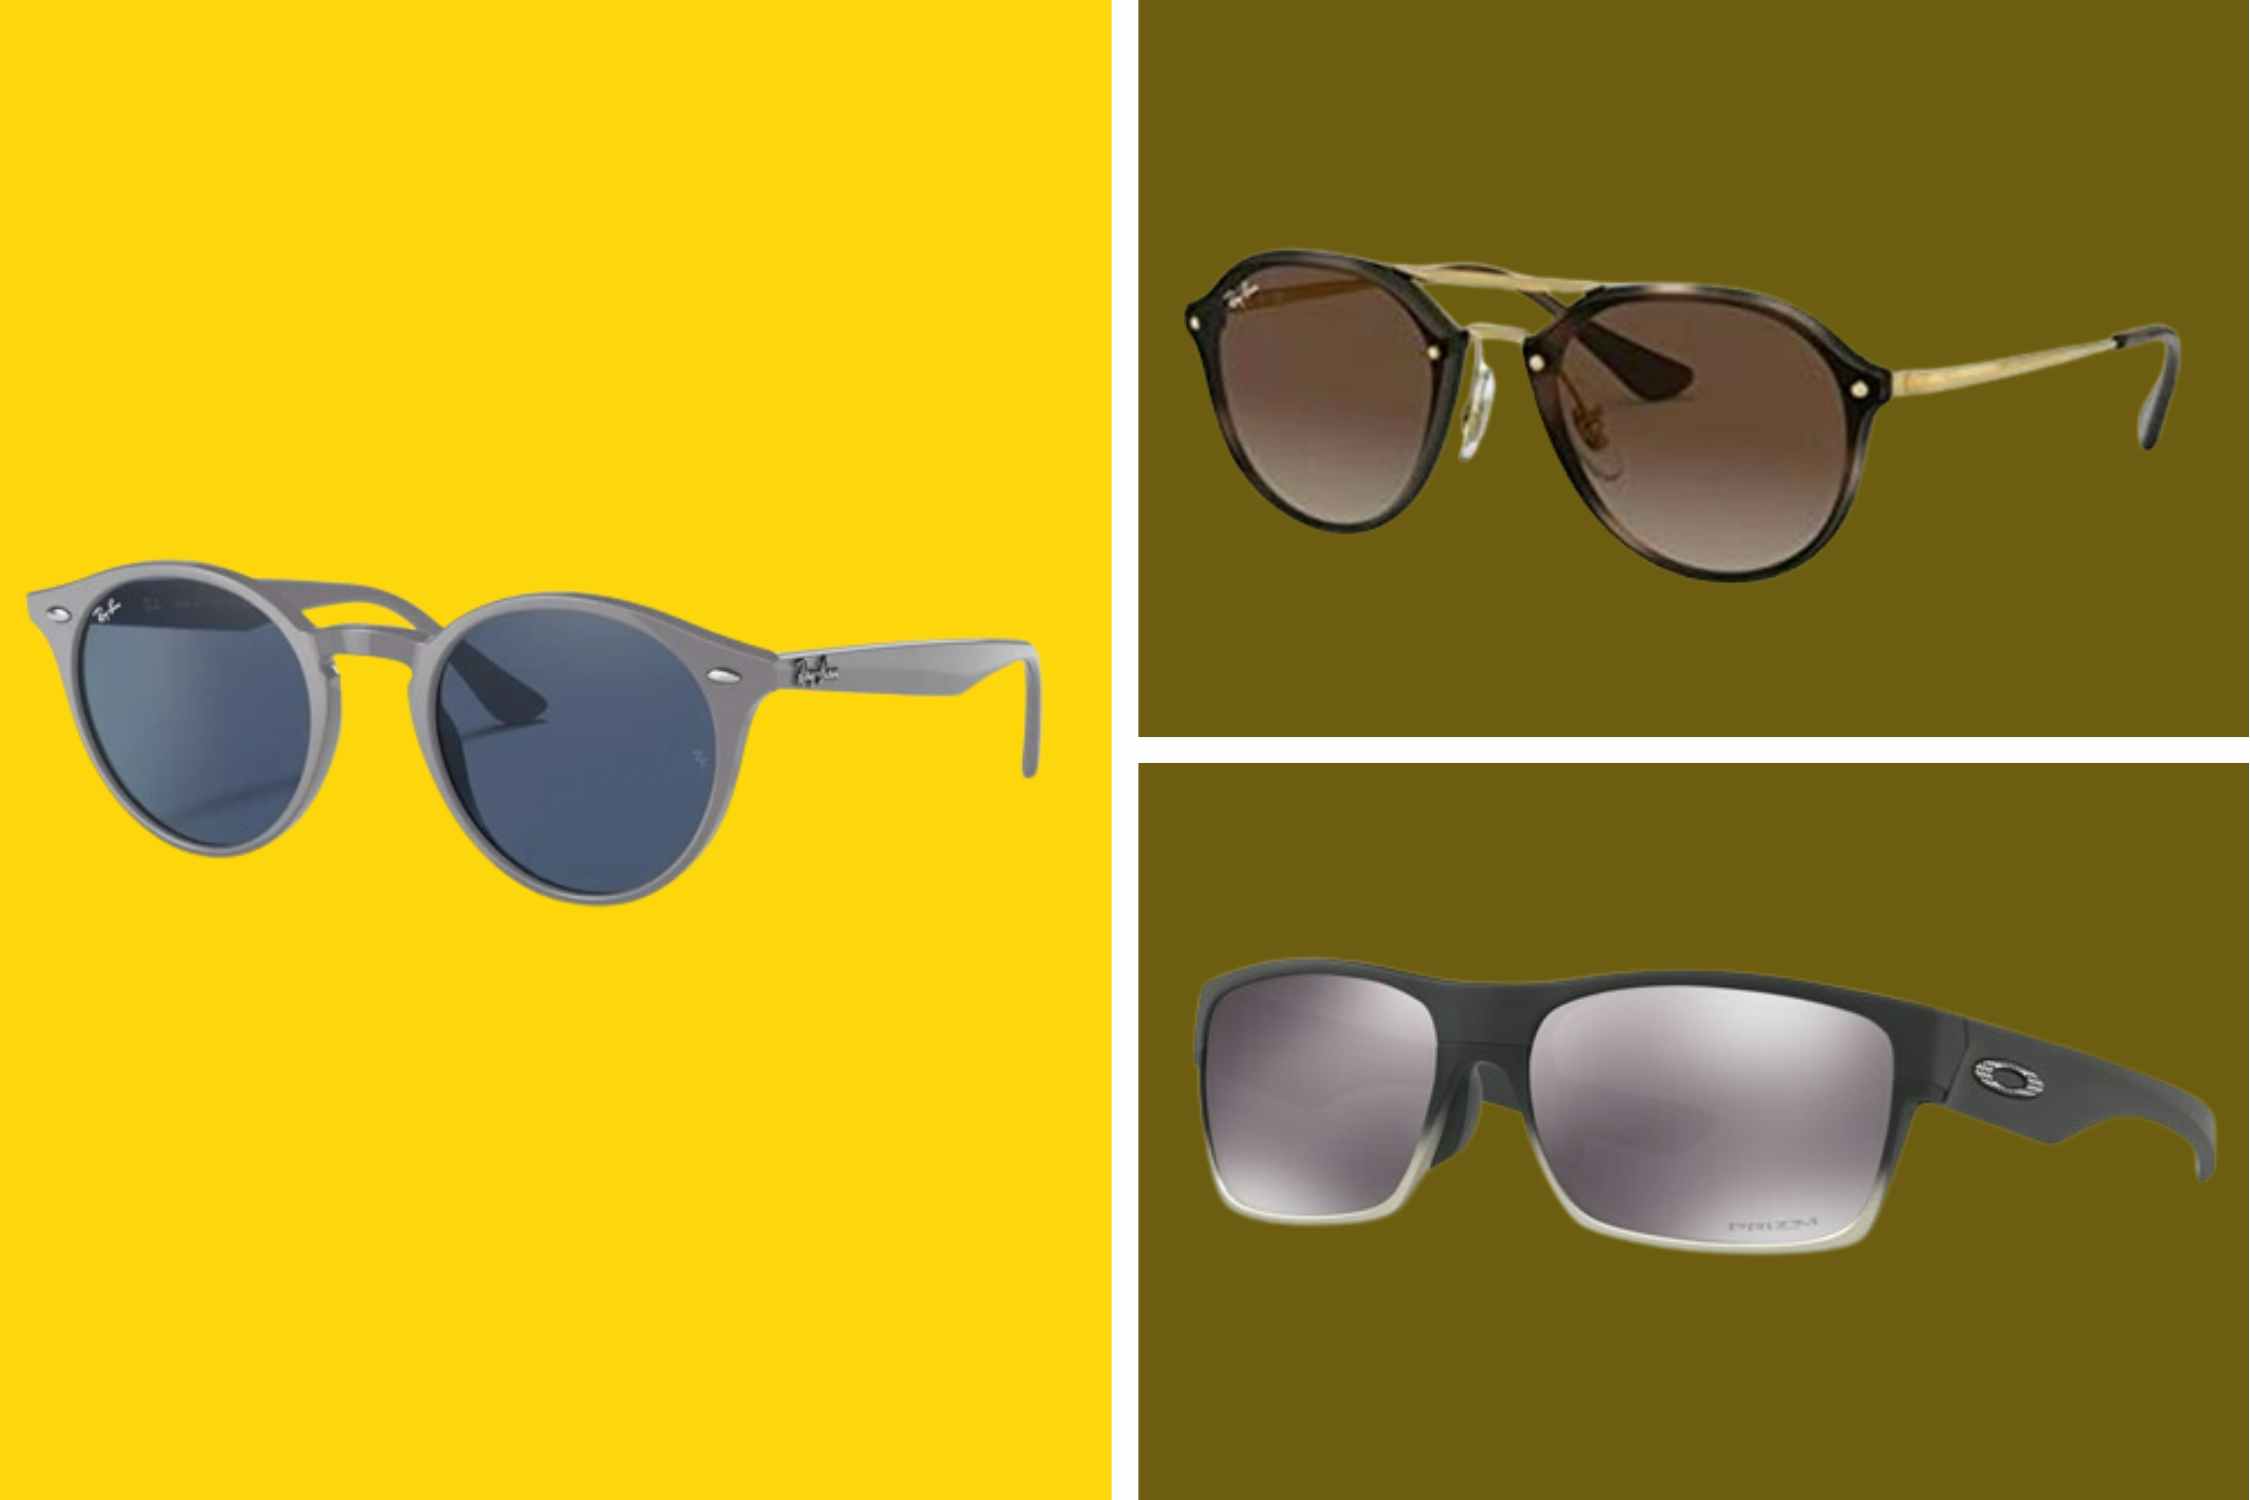 Sunglasses Sale: Ray-Bans Start at $43, Oakley for $75 Shipped With Prime